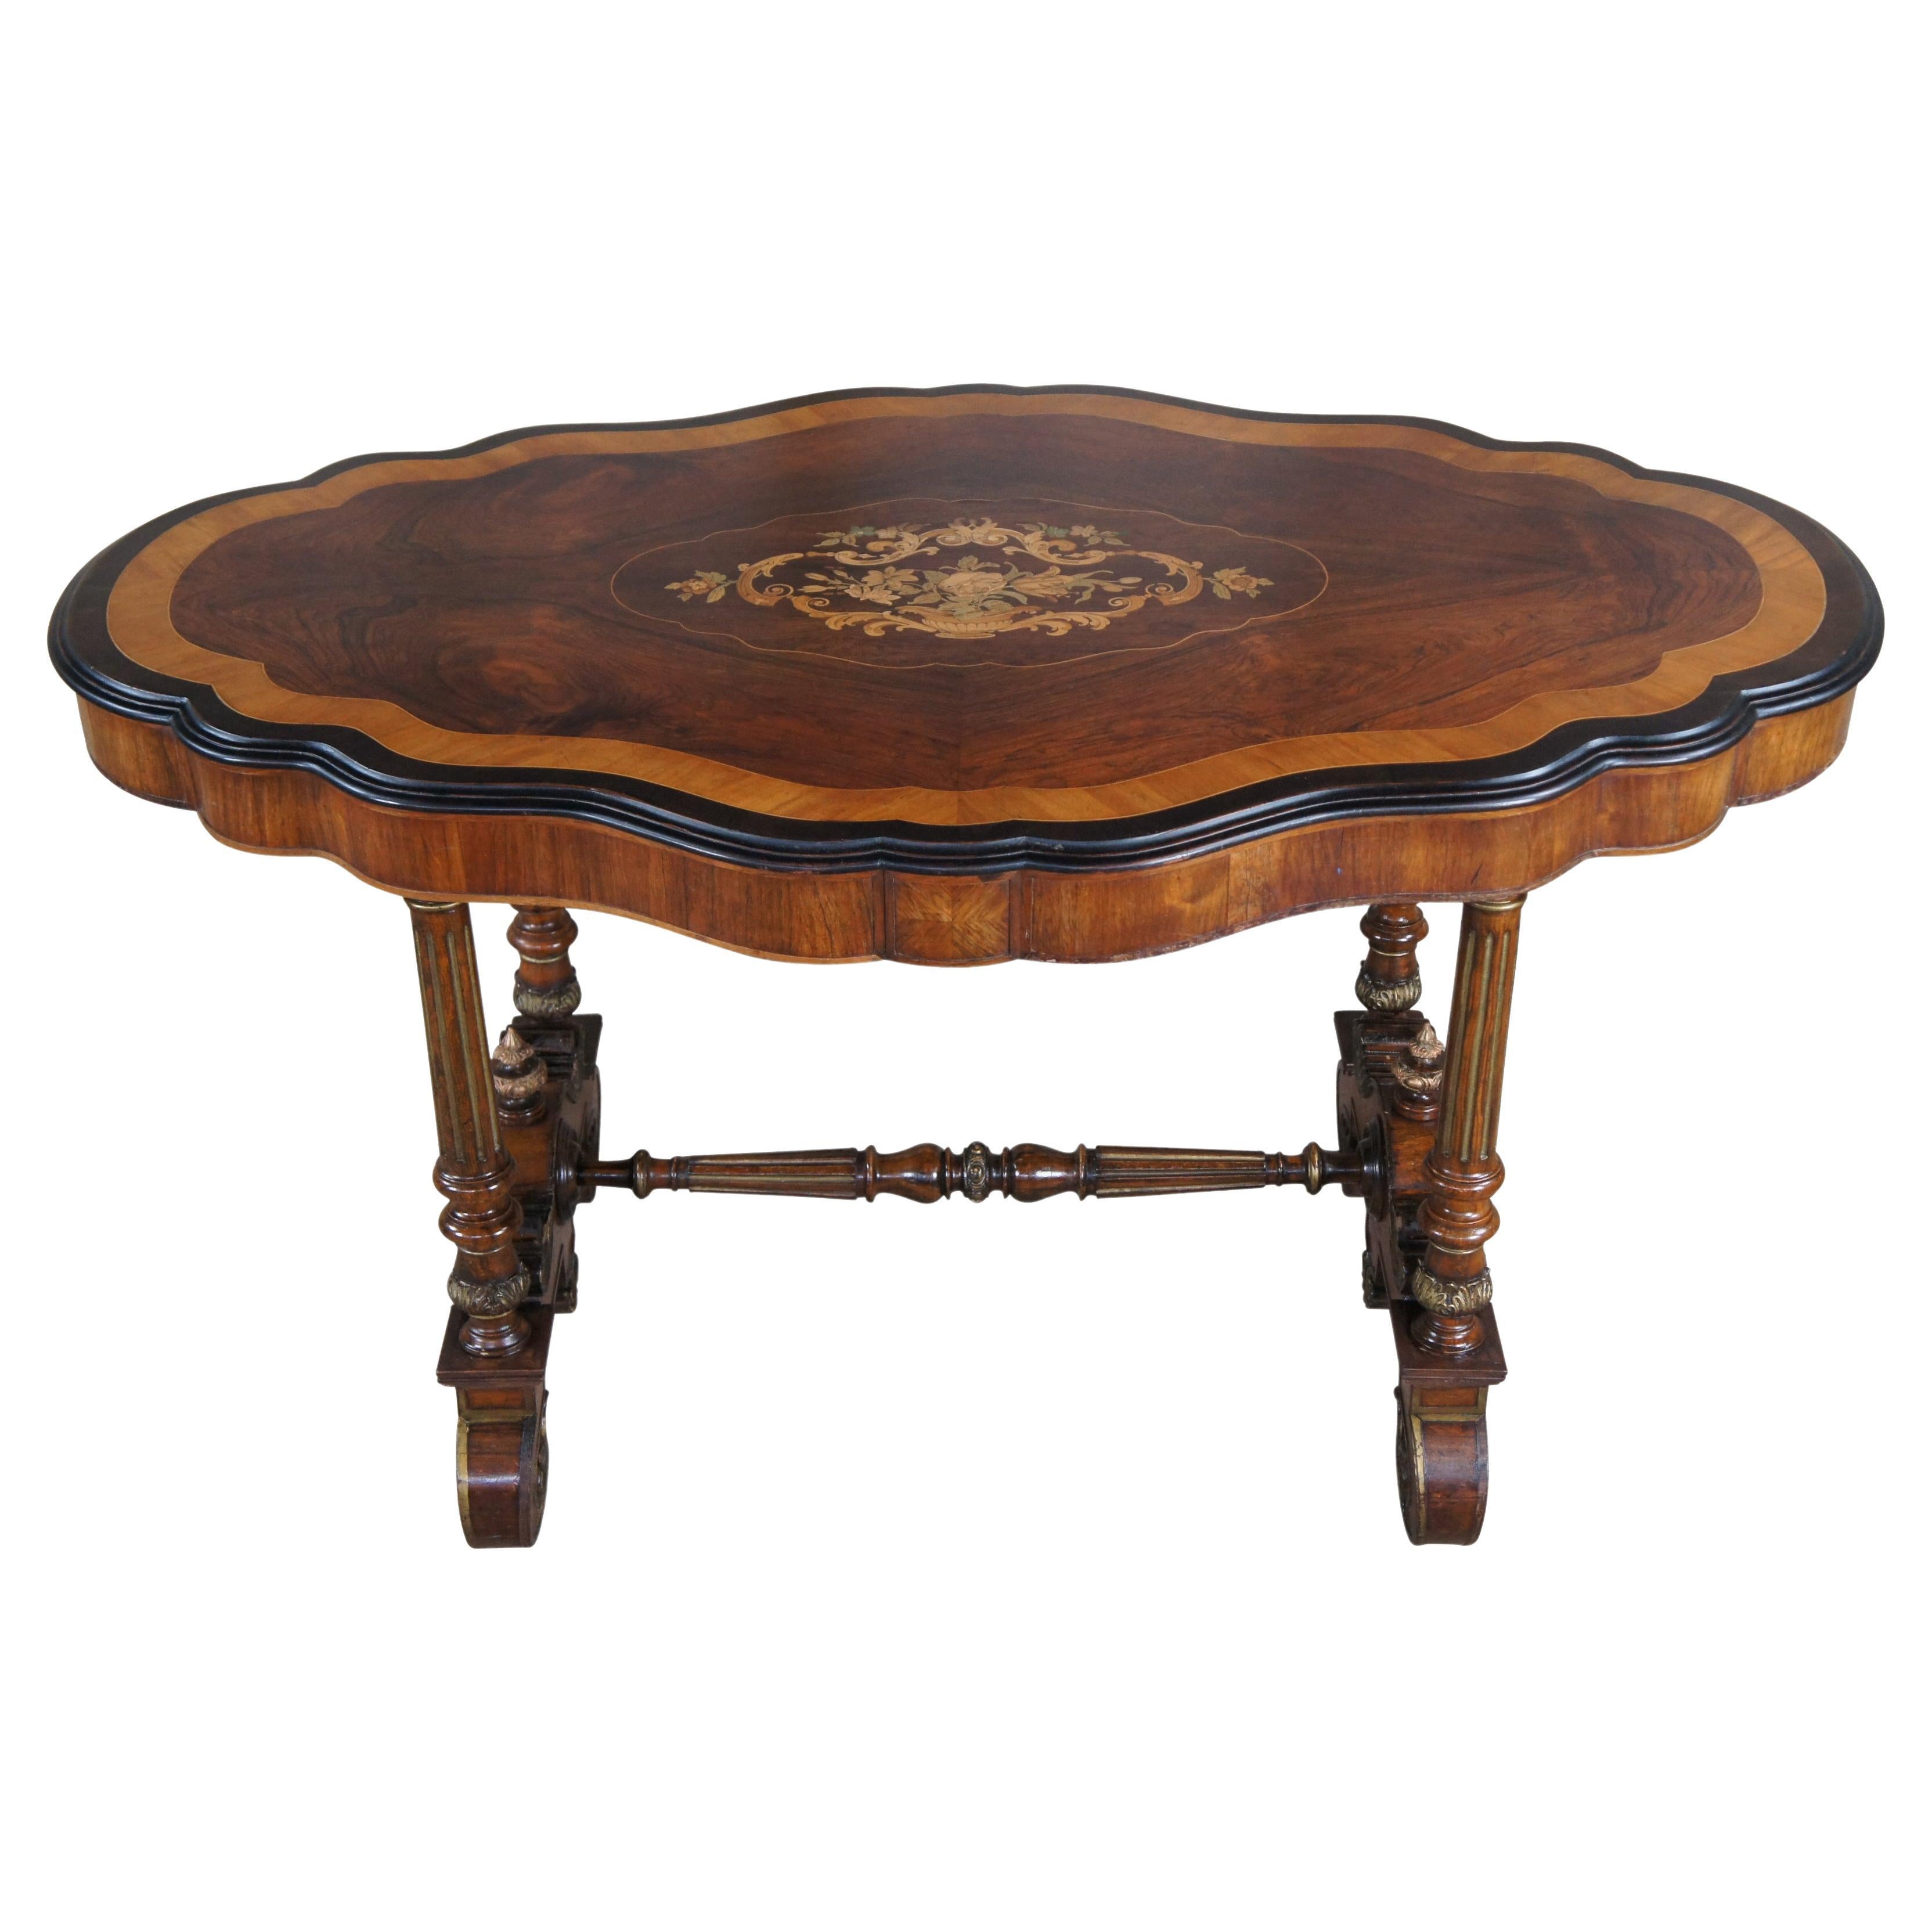 Antique American Renaissance Revival Serpentine Walnut Marquetry Center Table For Sale